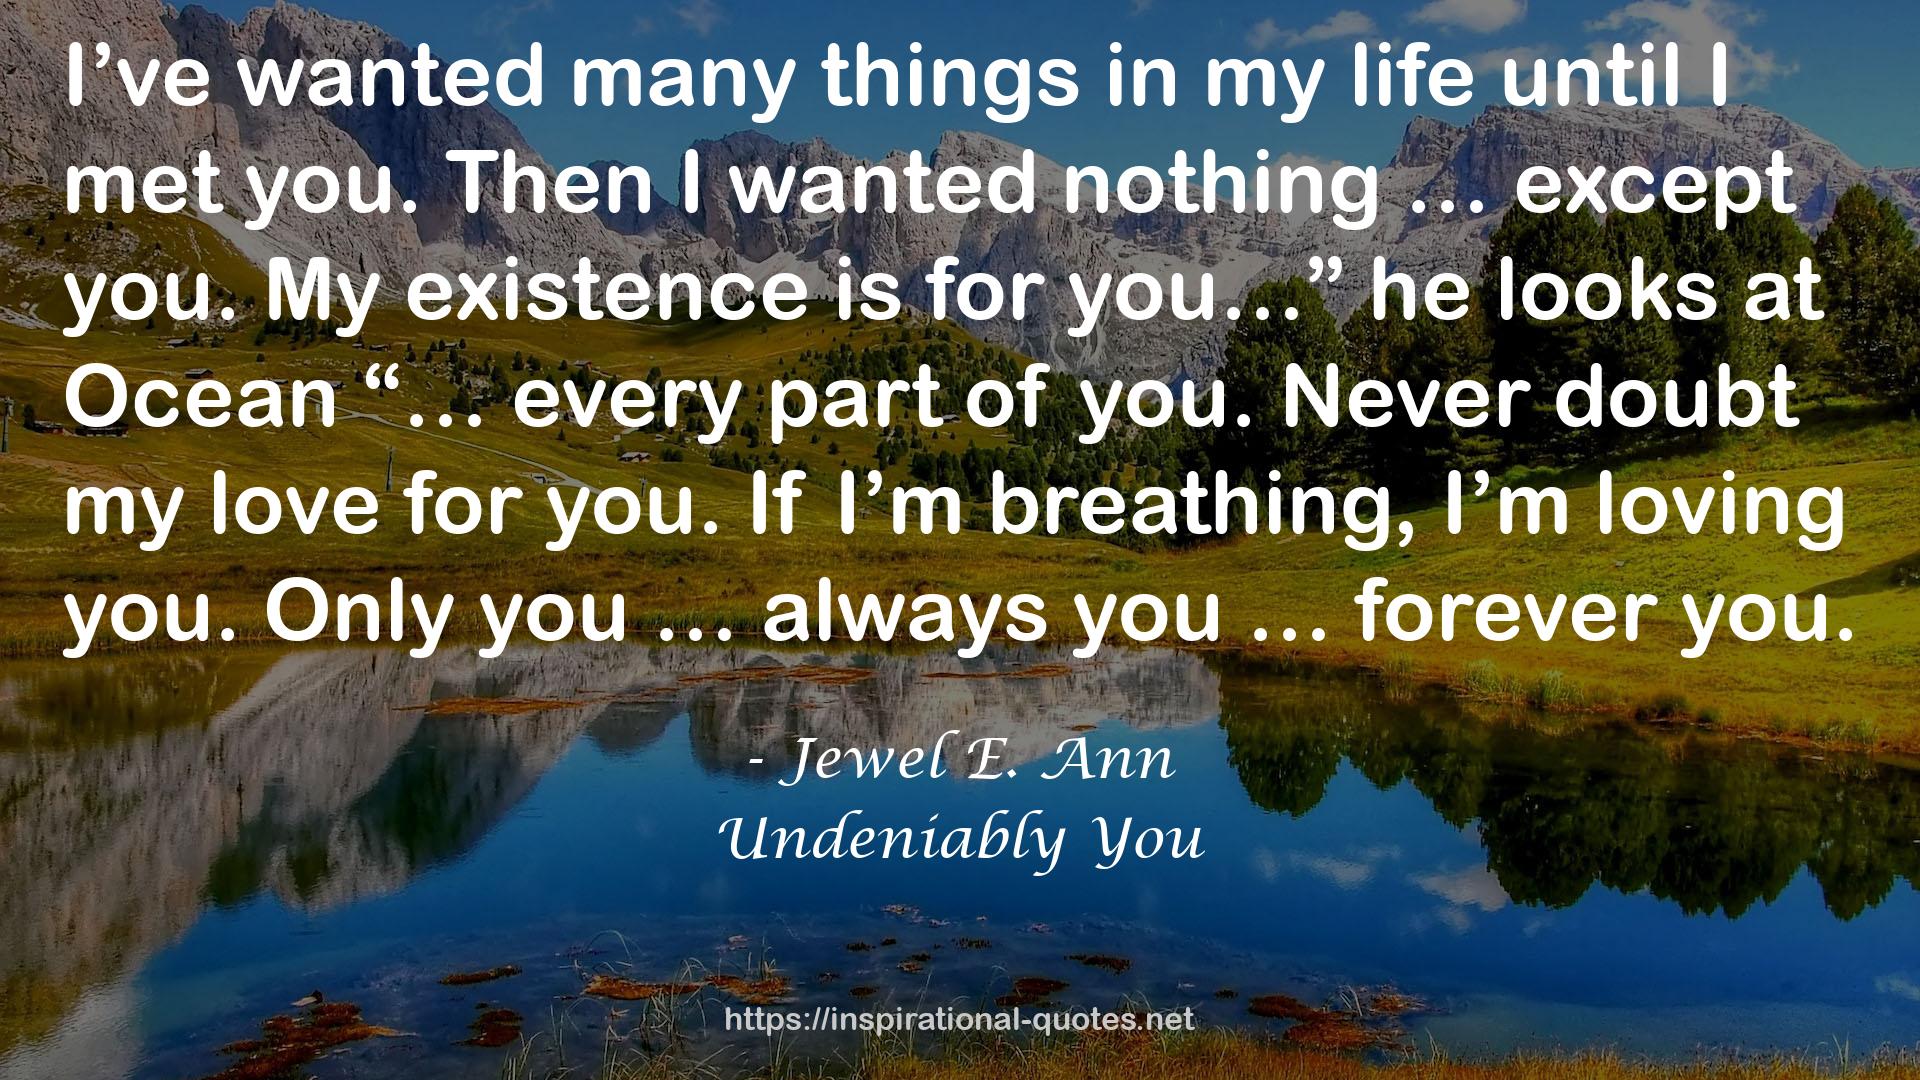 Undeniably You QUOTES